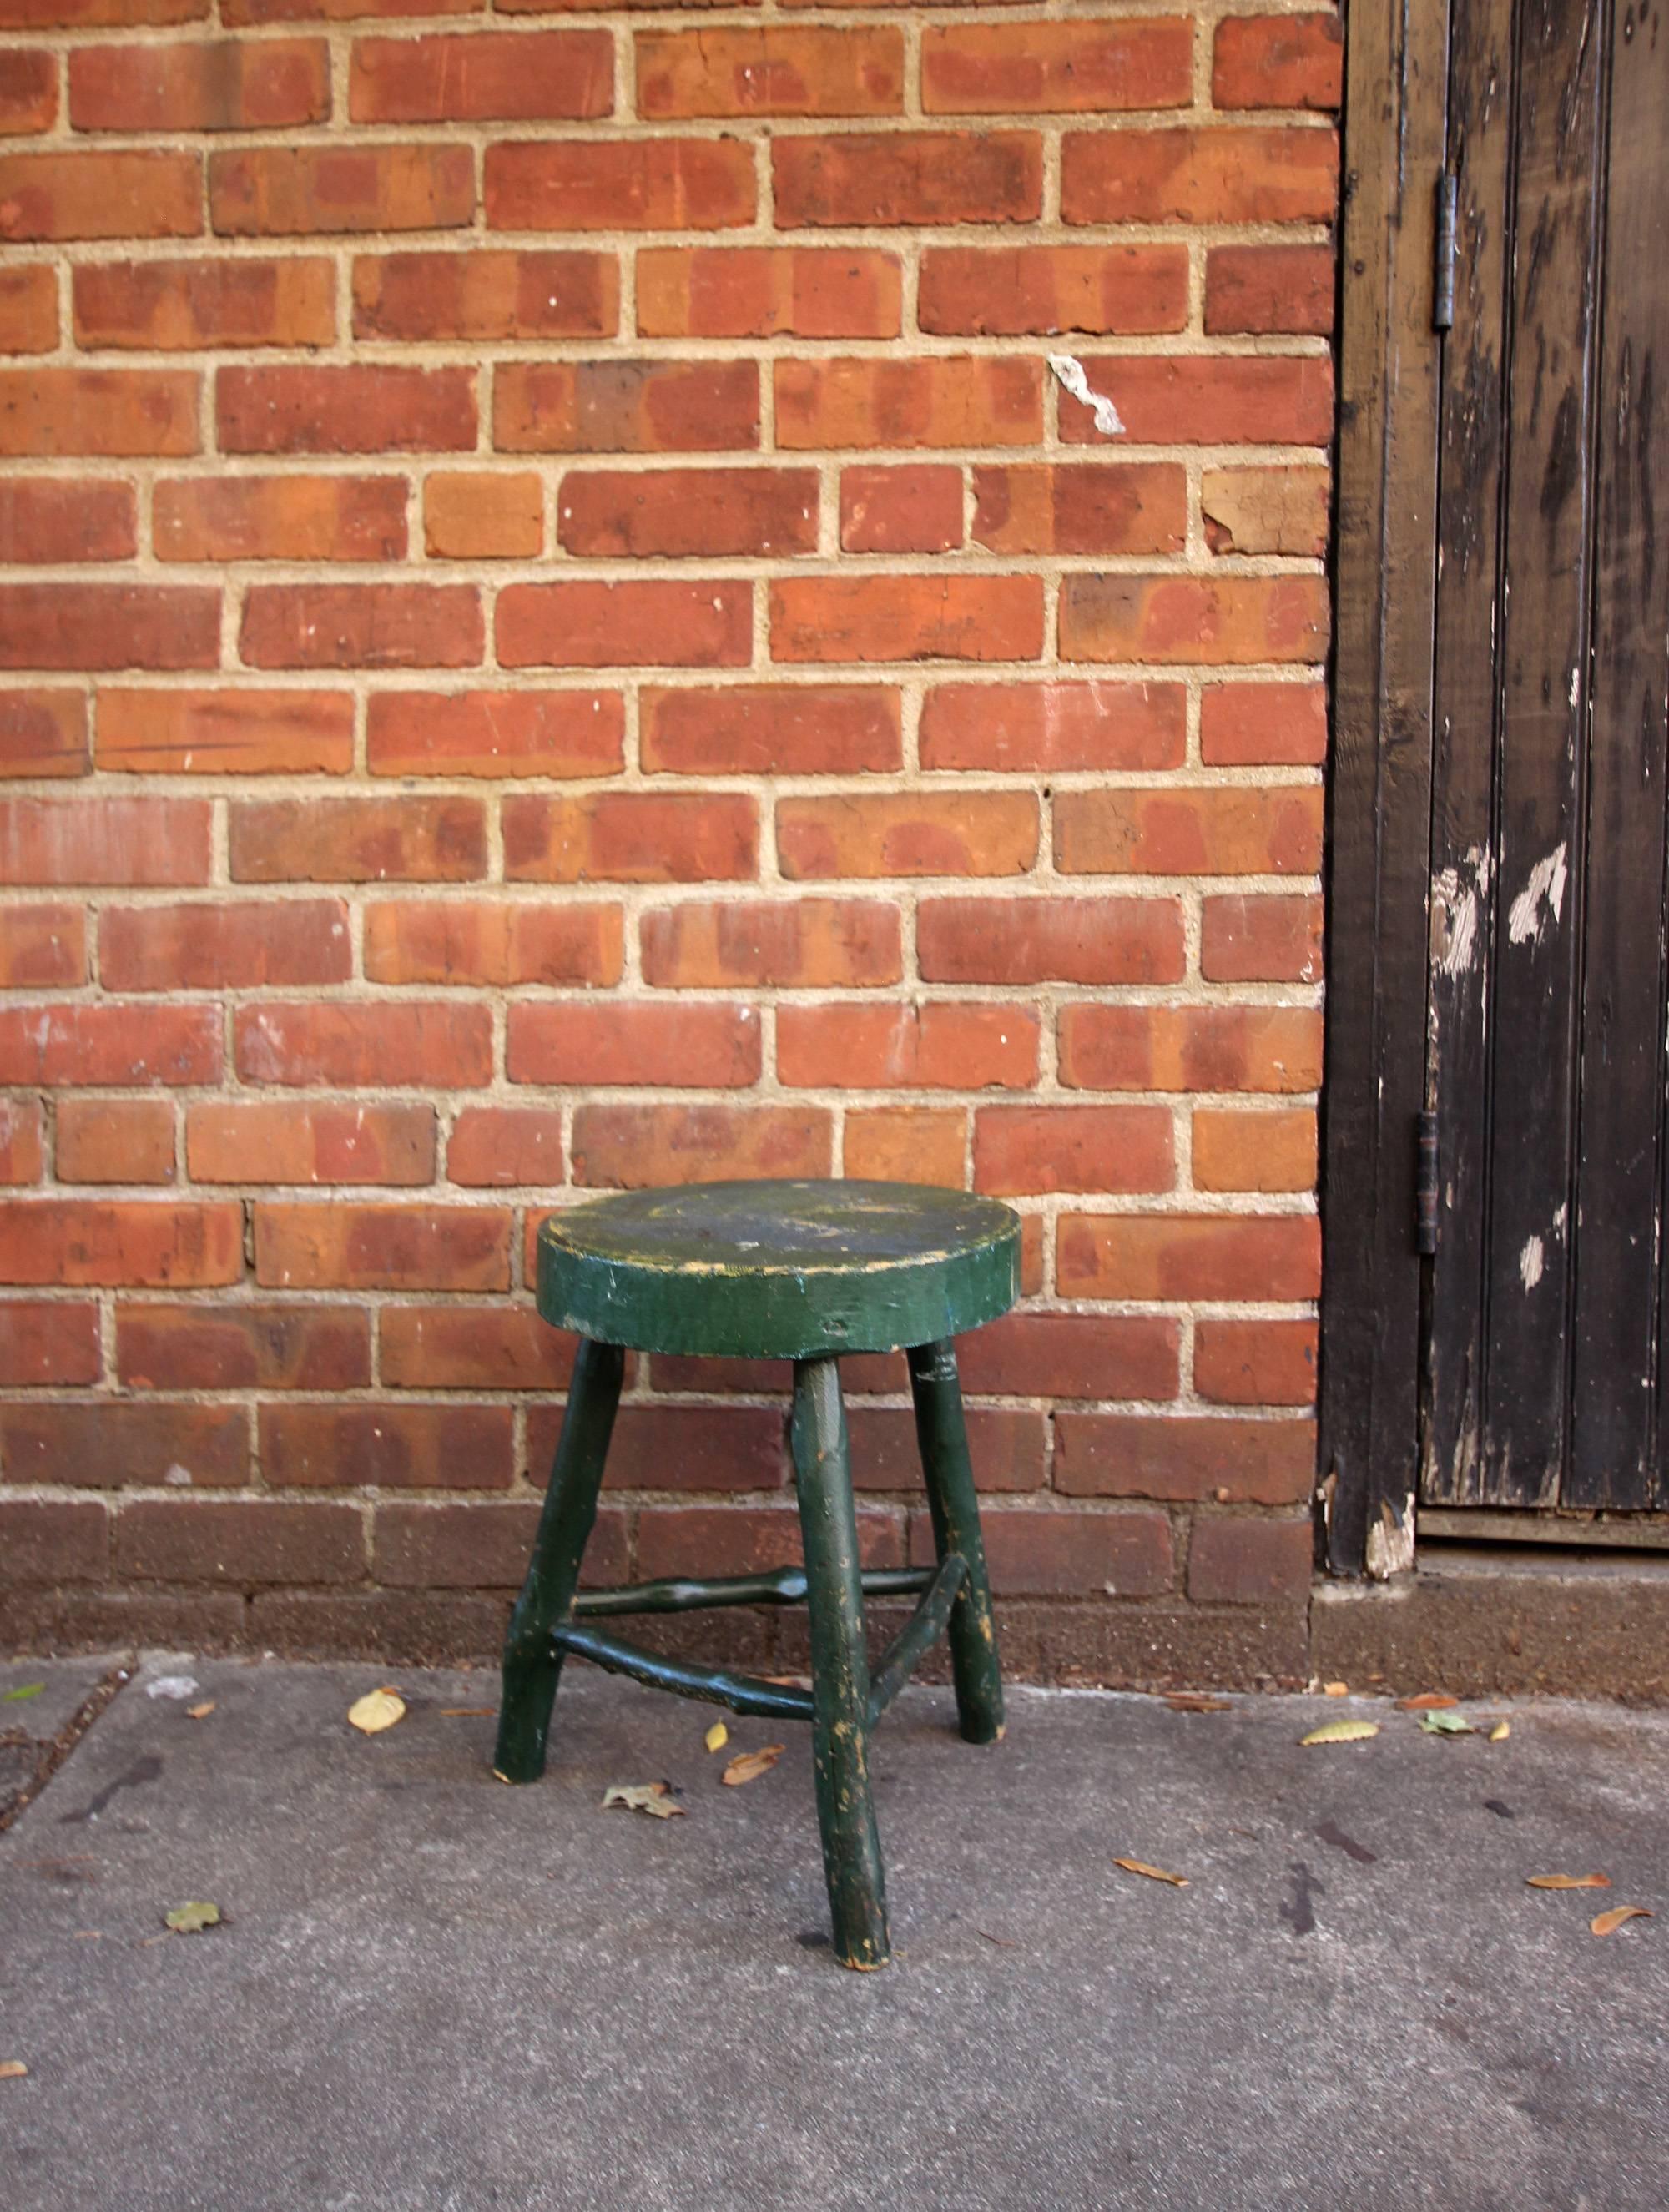 Low, fat tripod stool with a round carved seat and twig legs and stretchers, original green paint, American, circa 1890. Could be used as a stool for sitting or a small table. Very sturdy.